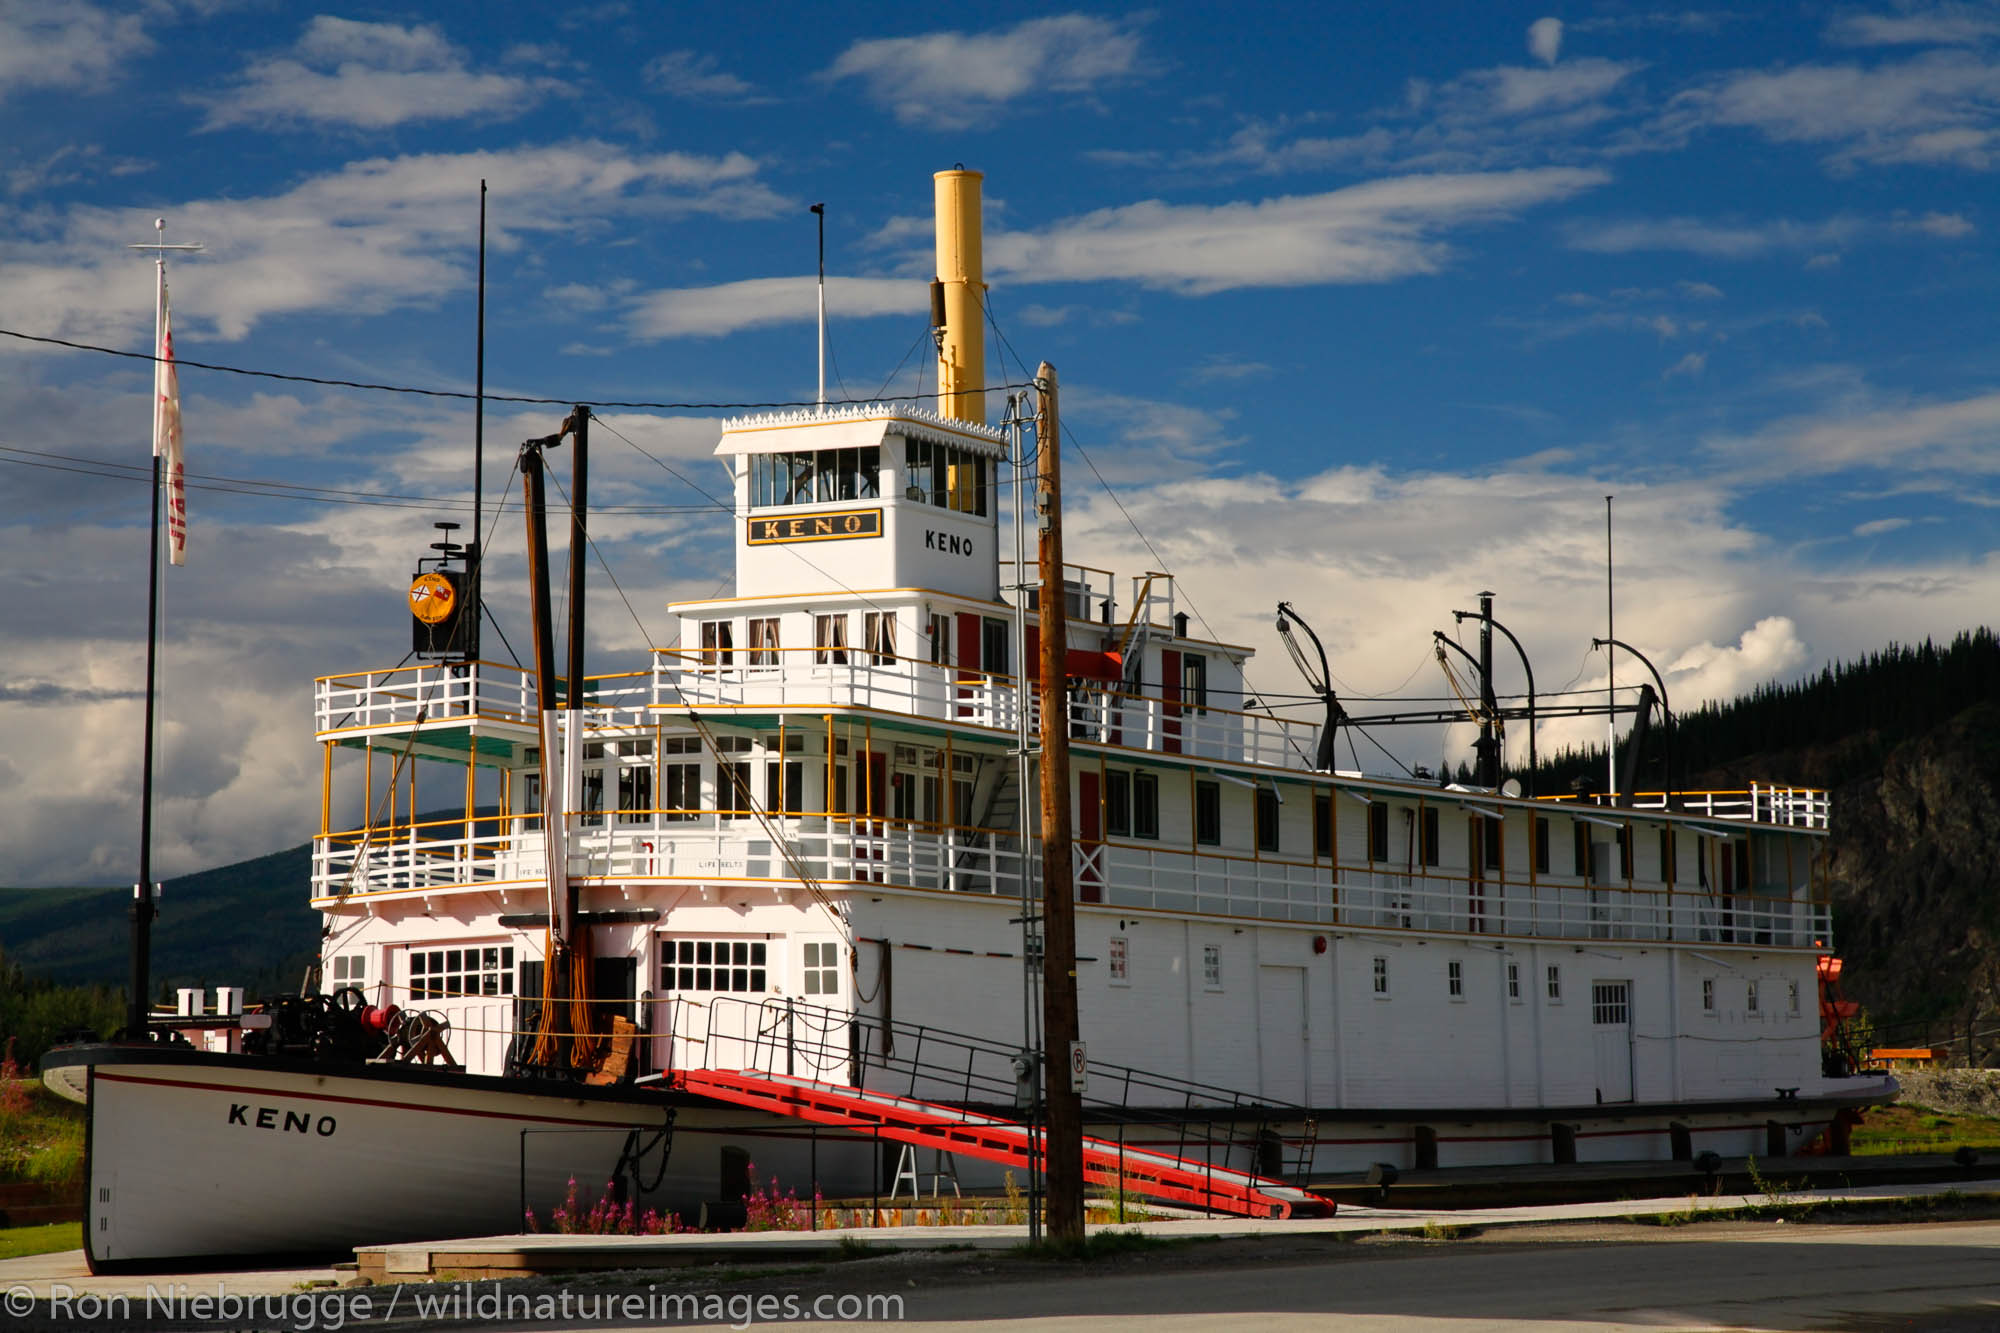 The SS Keno riverboat in the historic gold rush town of Dawson City, Yukon Territory, Canada.